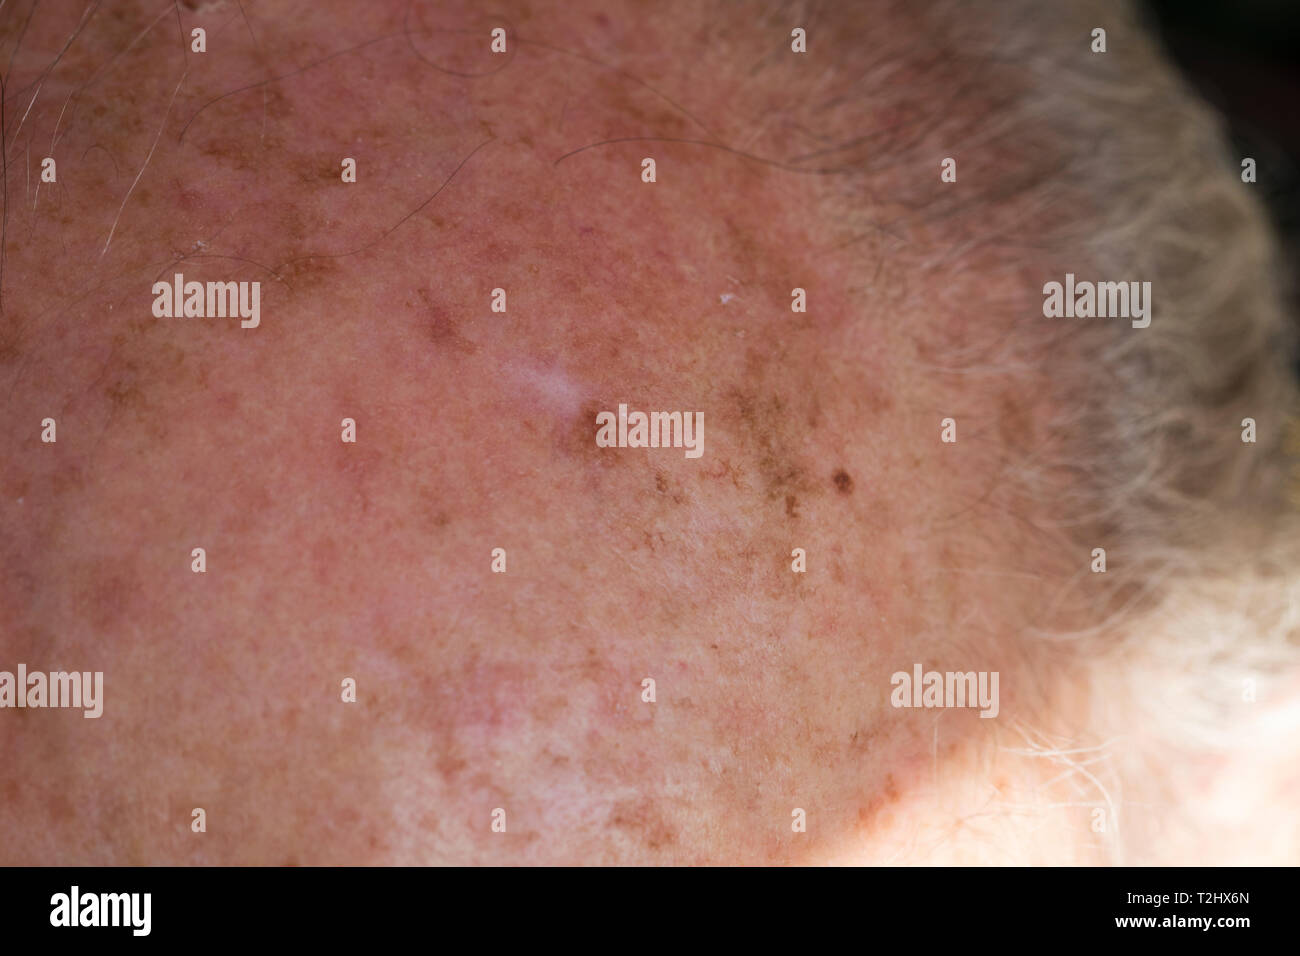 Close up of elderly mans forehead with precancerous scaly skin caouse by sun damage. Sun tanning trauma on skin. Stock Photo